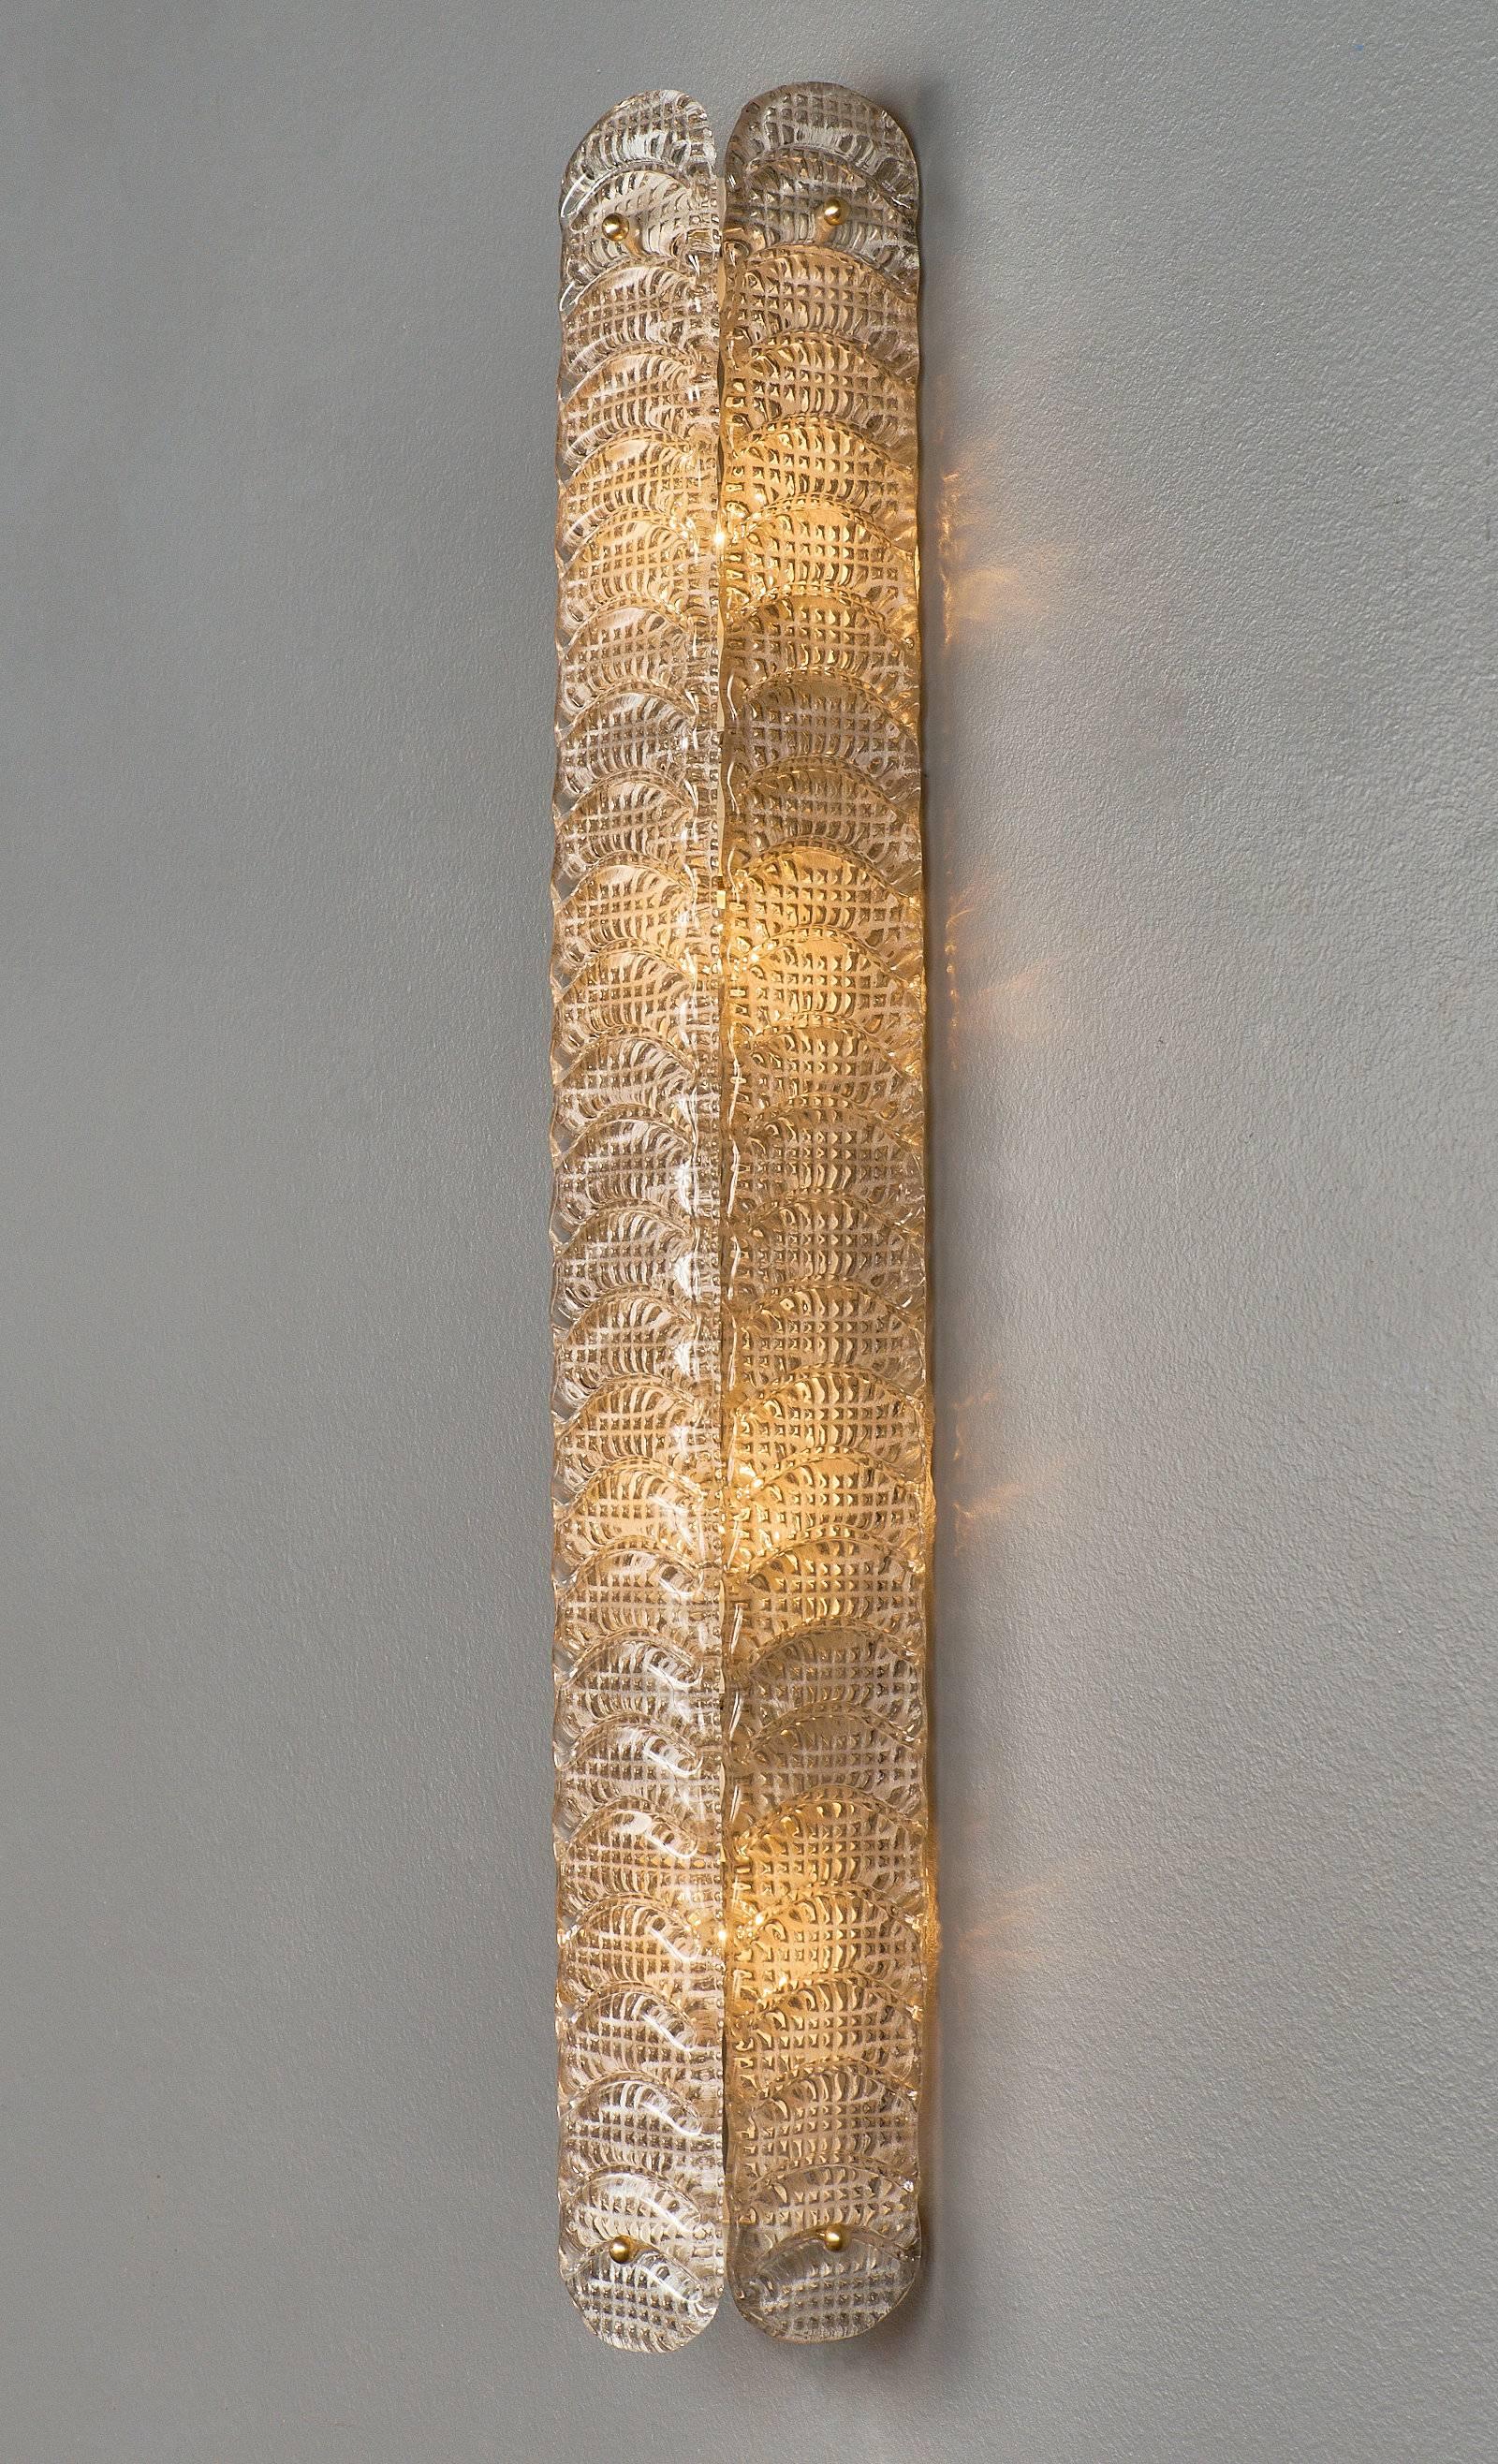 A pair of Murano glass sconces featuring three important thick glass slabs molded and textured; with white glass layered within the texture of the reverse to create a “python skin’ effect. These sconces have been wired to fit US standards.

These